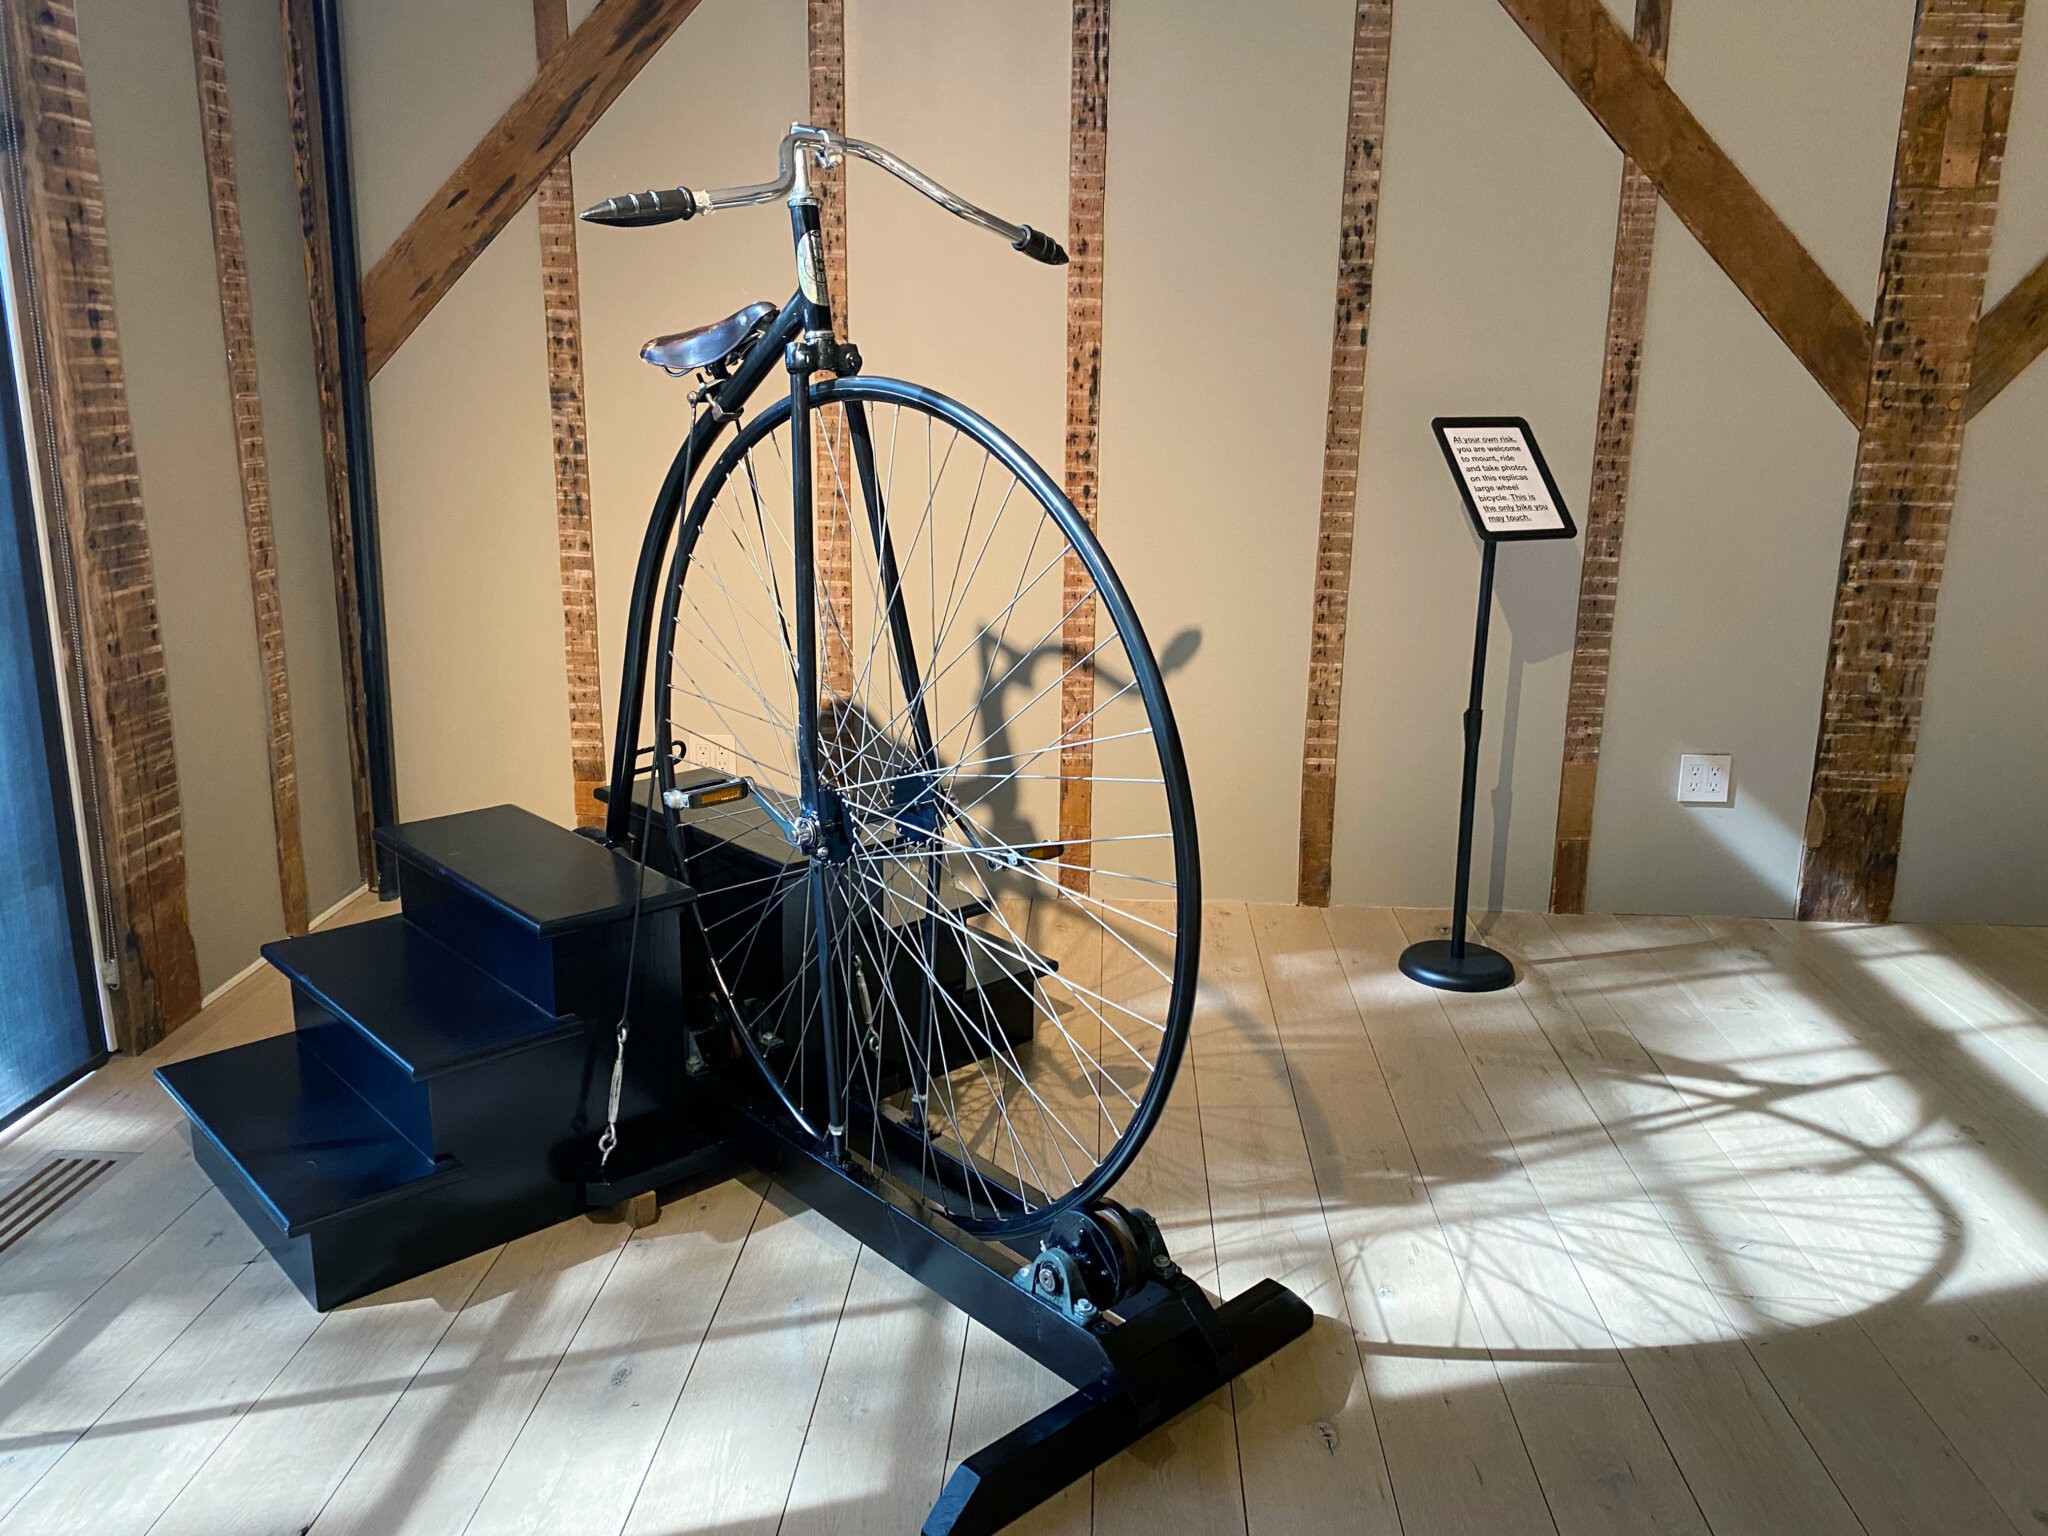 Replica 1880-90s Penny-farthing or High-wheel bicycle at The Church in Sag Harbor in the Hamptons